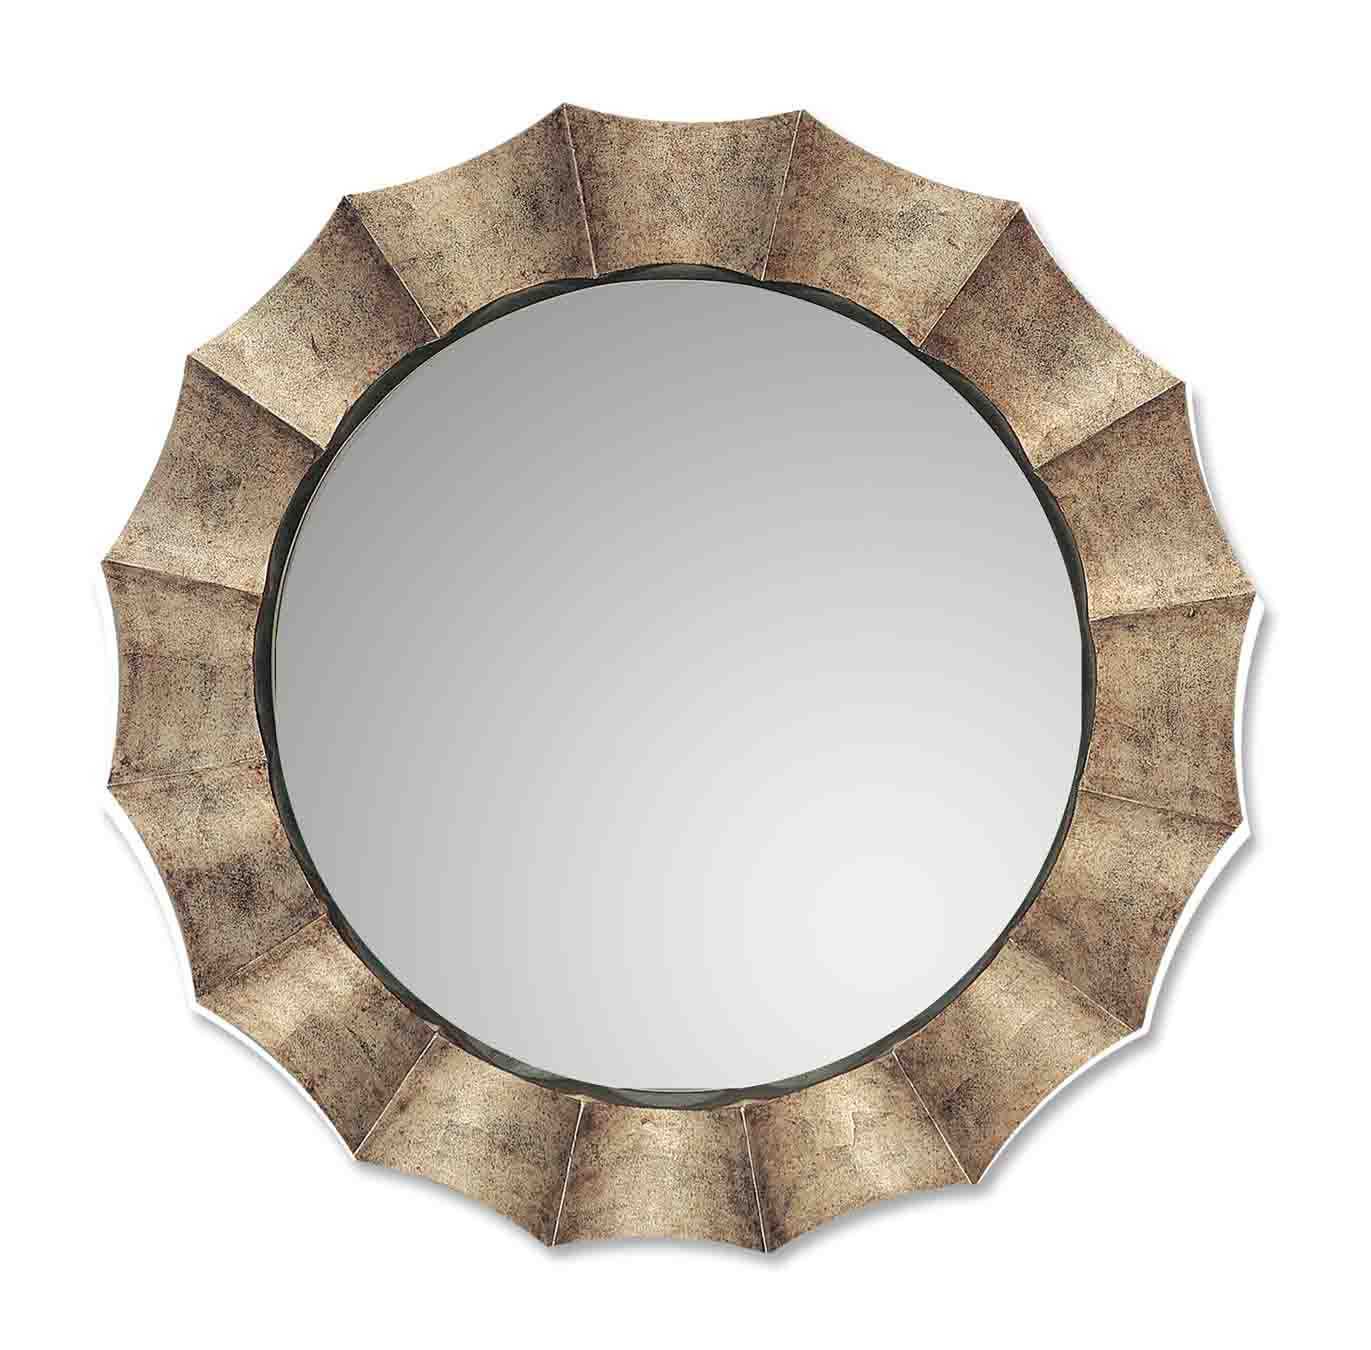 Modern Round Antiqued Silver Leaf Champagne Wall Mirror Large 41 Inside Antique Silver Round Wall Mirrors (View 12 of 15)